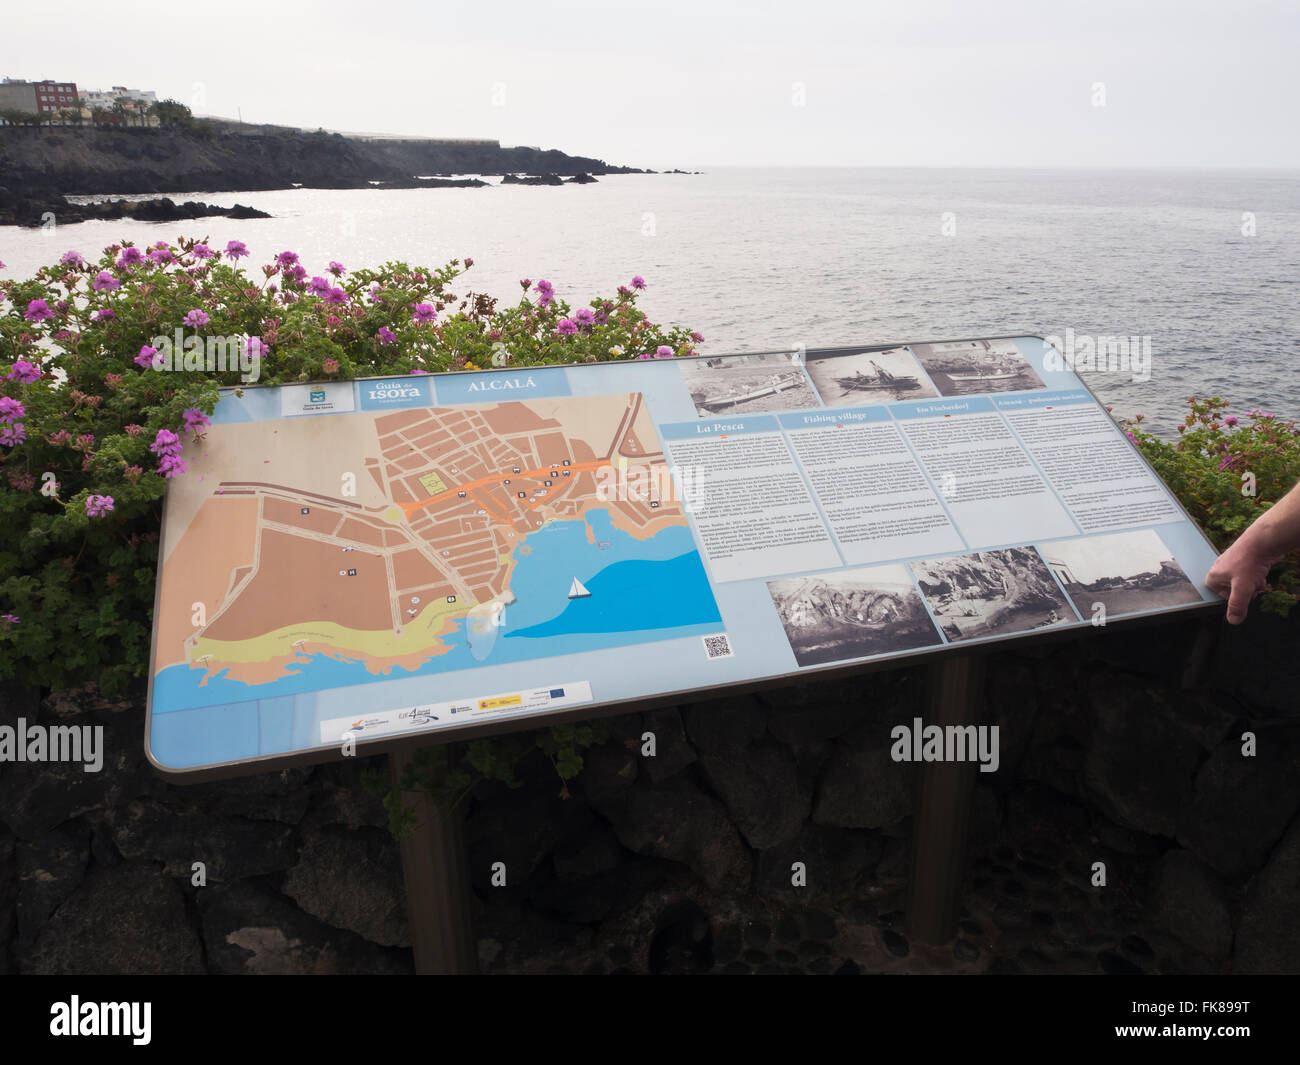 Information board and town map along the coastal promenade in Alcala Tenerife Spain, Stock Photo